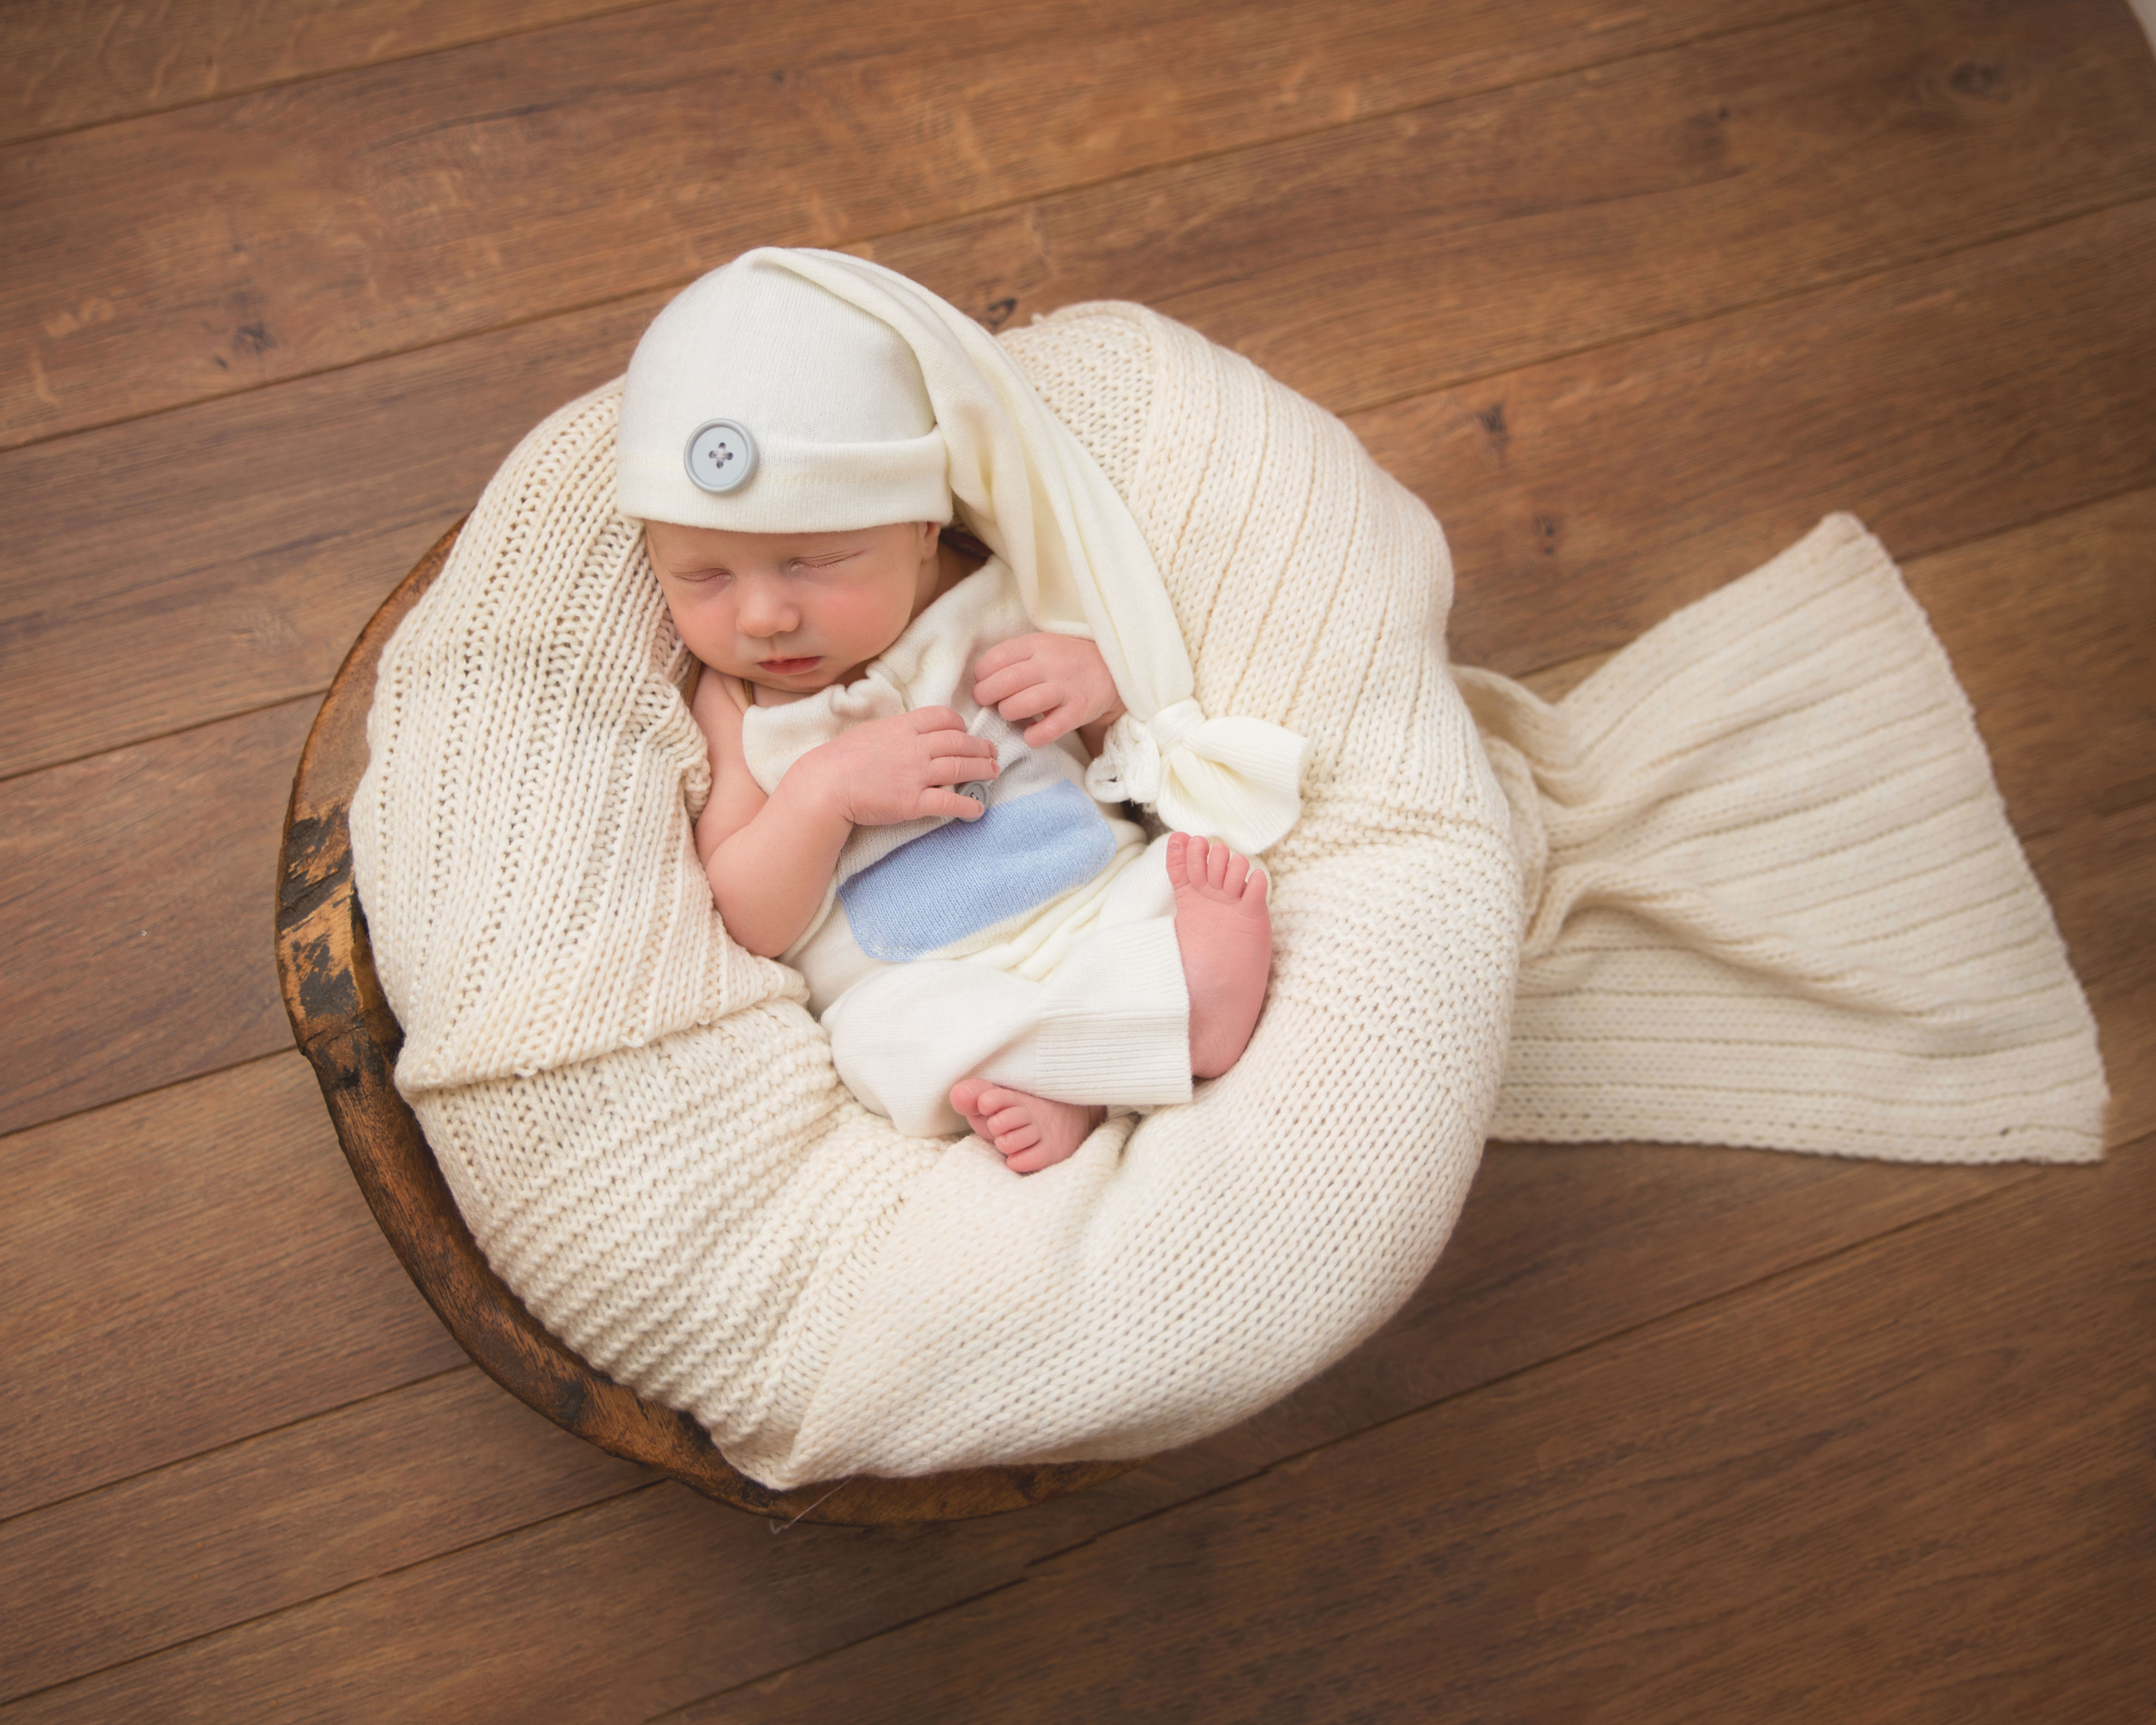 Wooden background, baby placed in curved natural position with light toned wraps